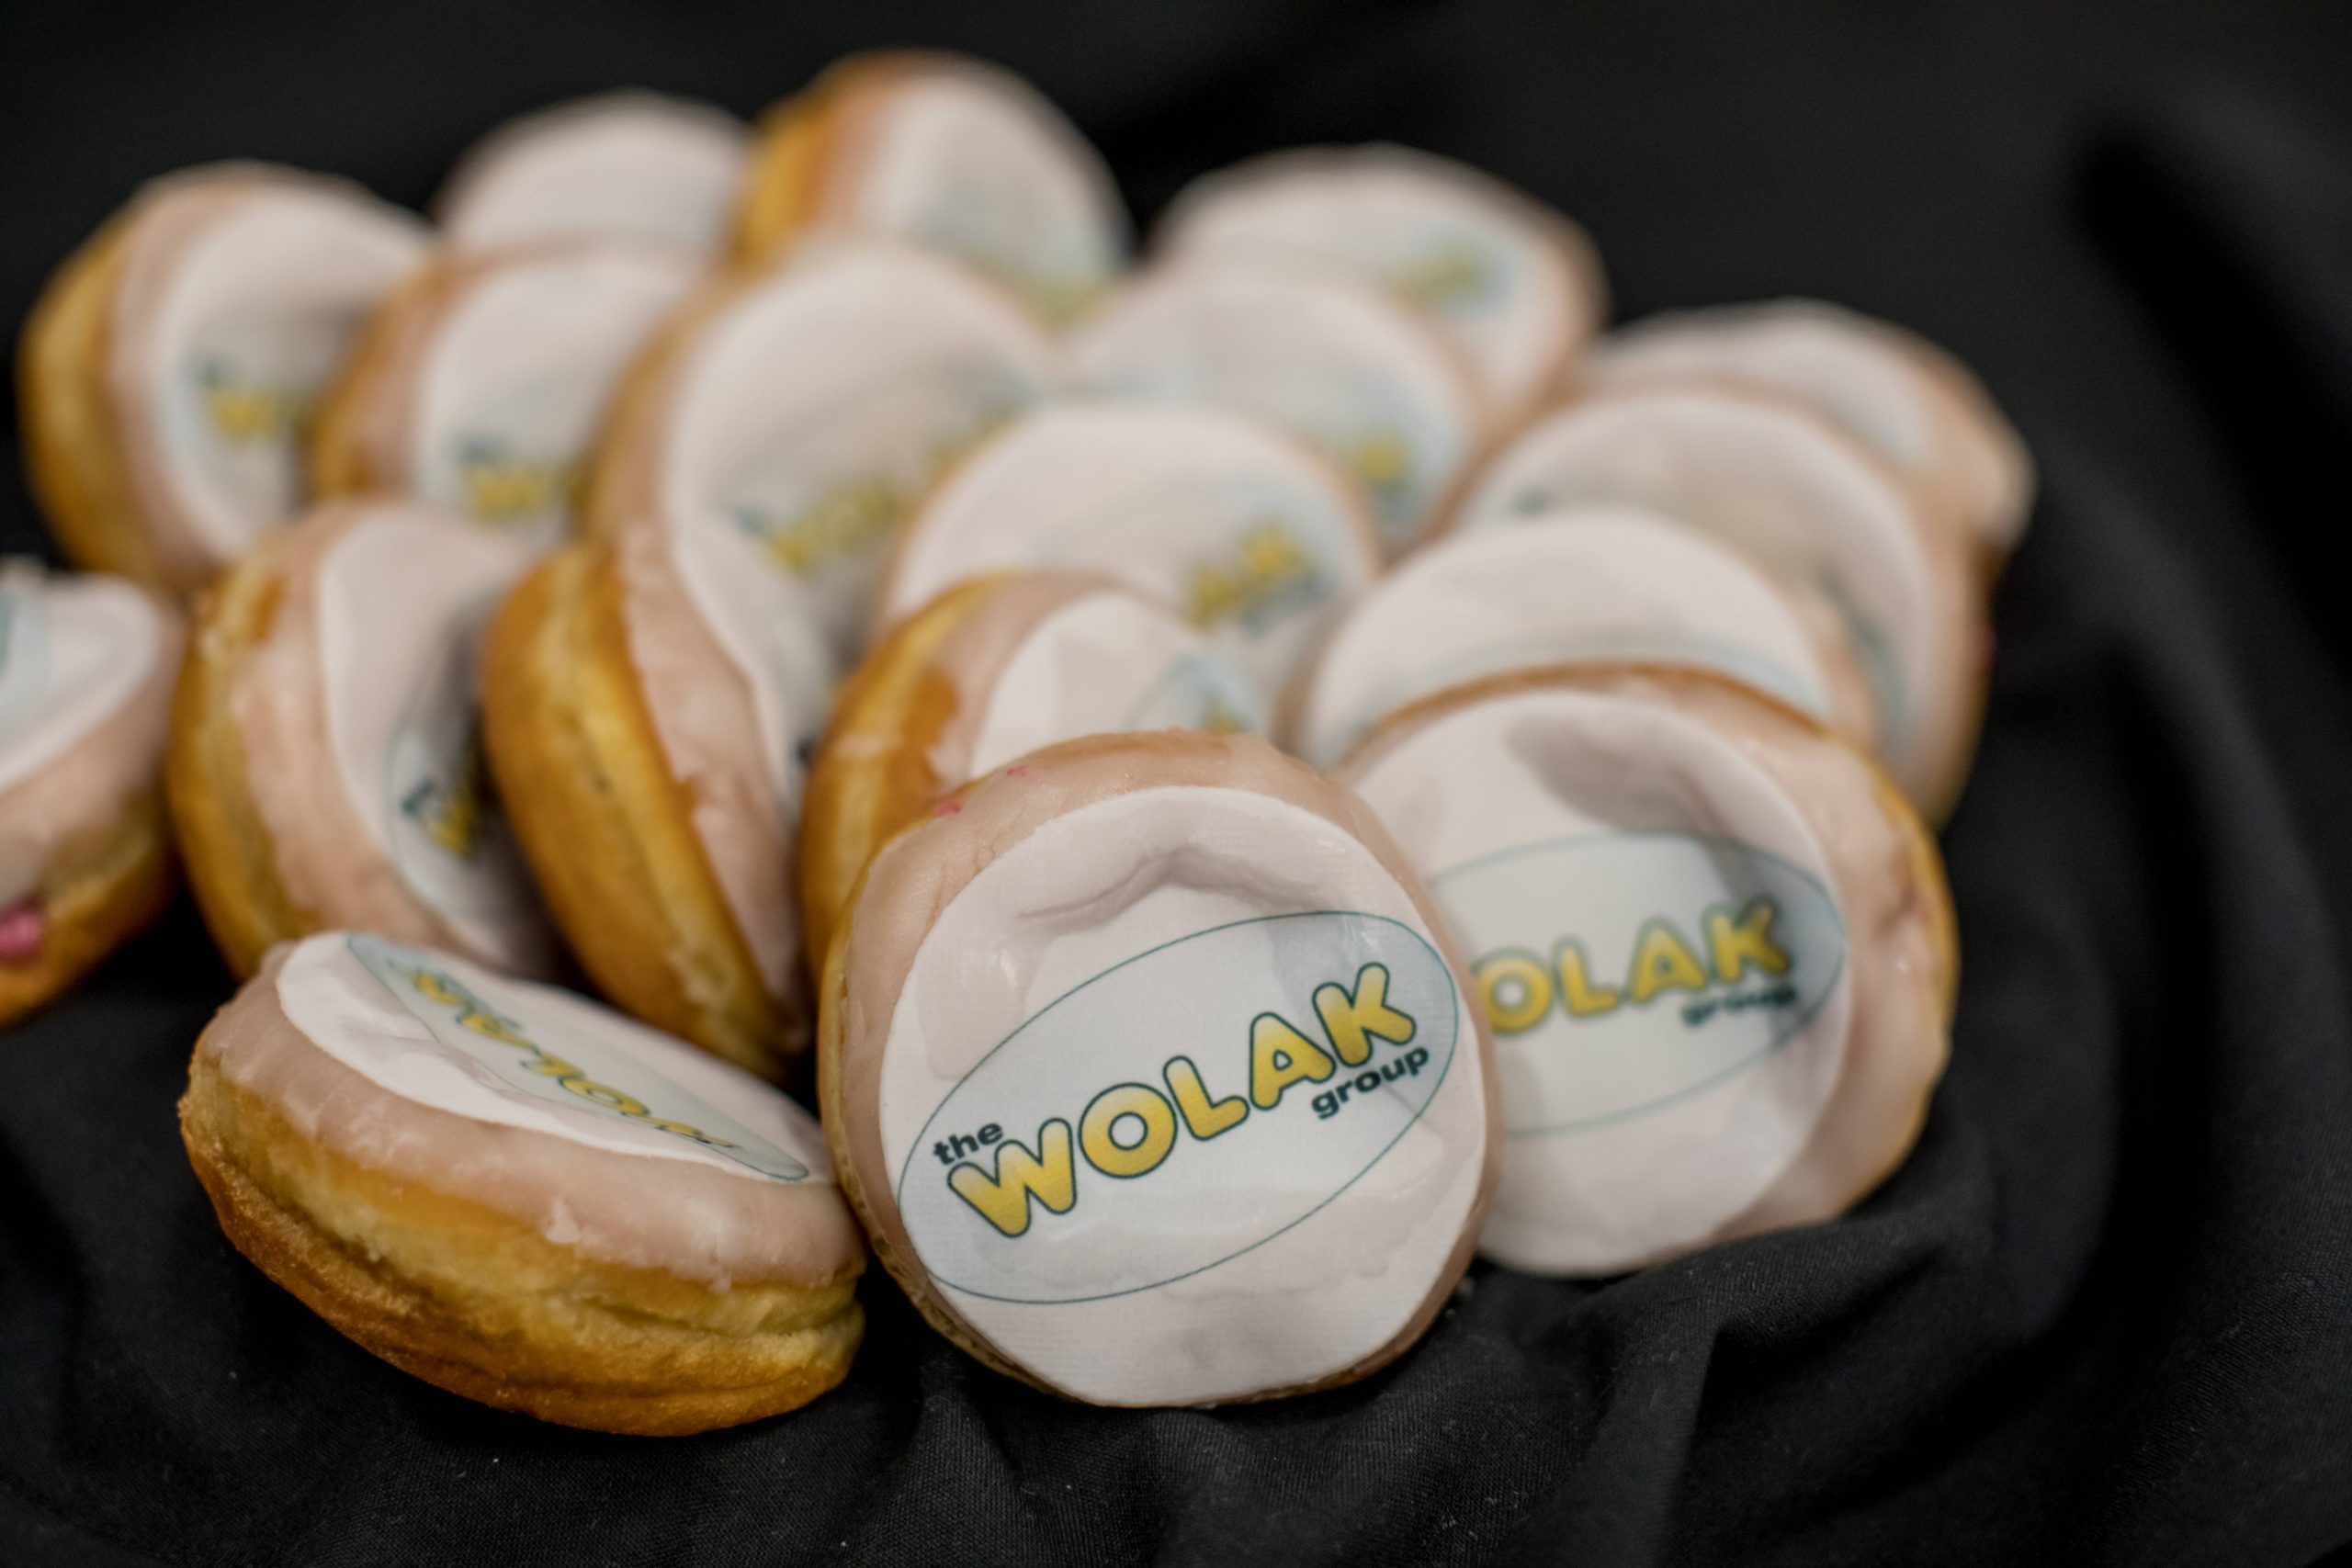 The Wolak Group Donuts